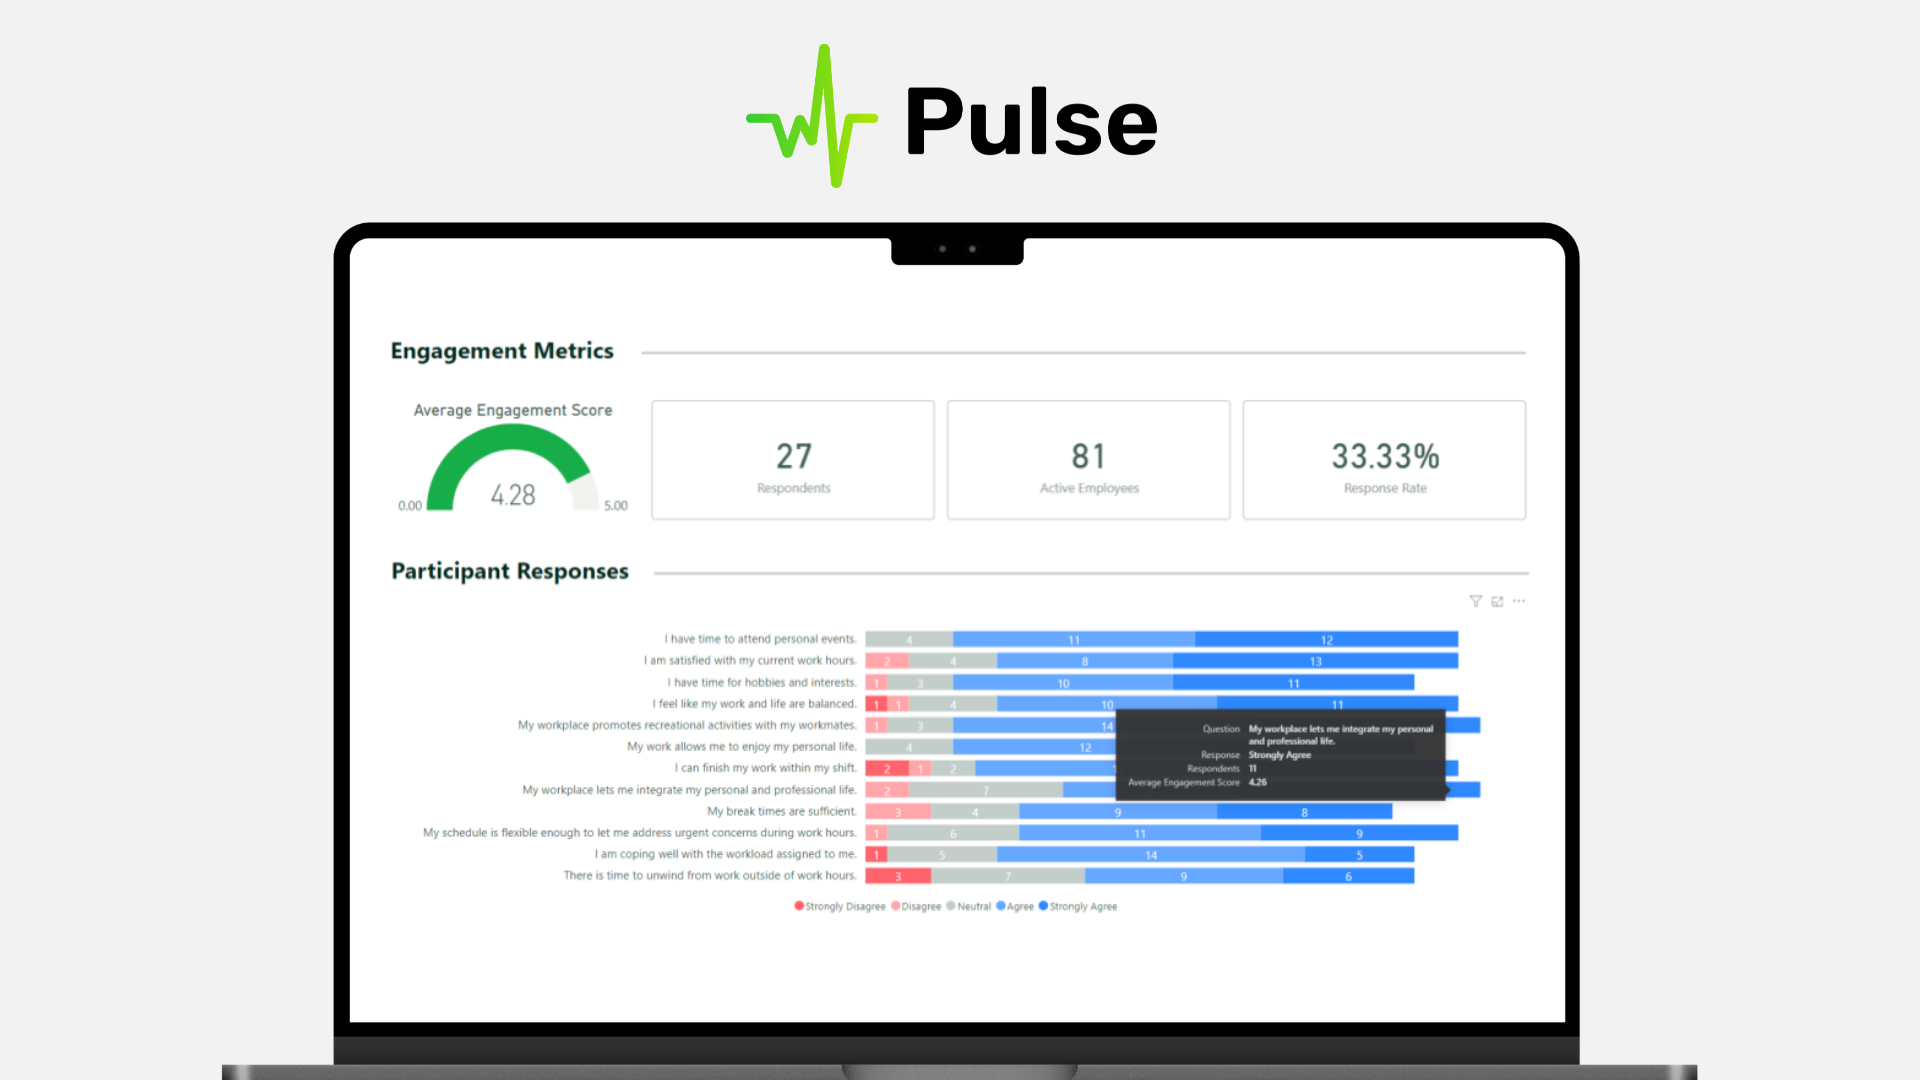 With Sprout Pulse, personalize dashboards where you can get a clear picture of employee engagement in your company.